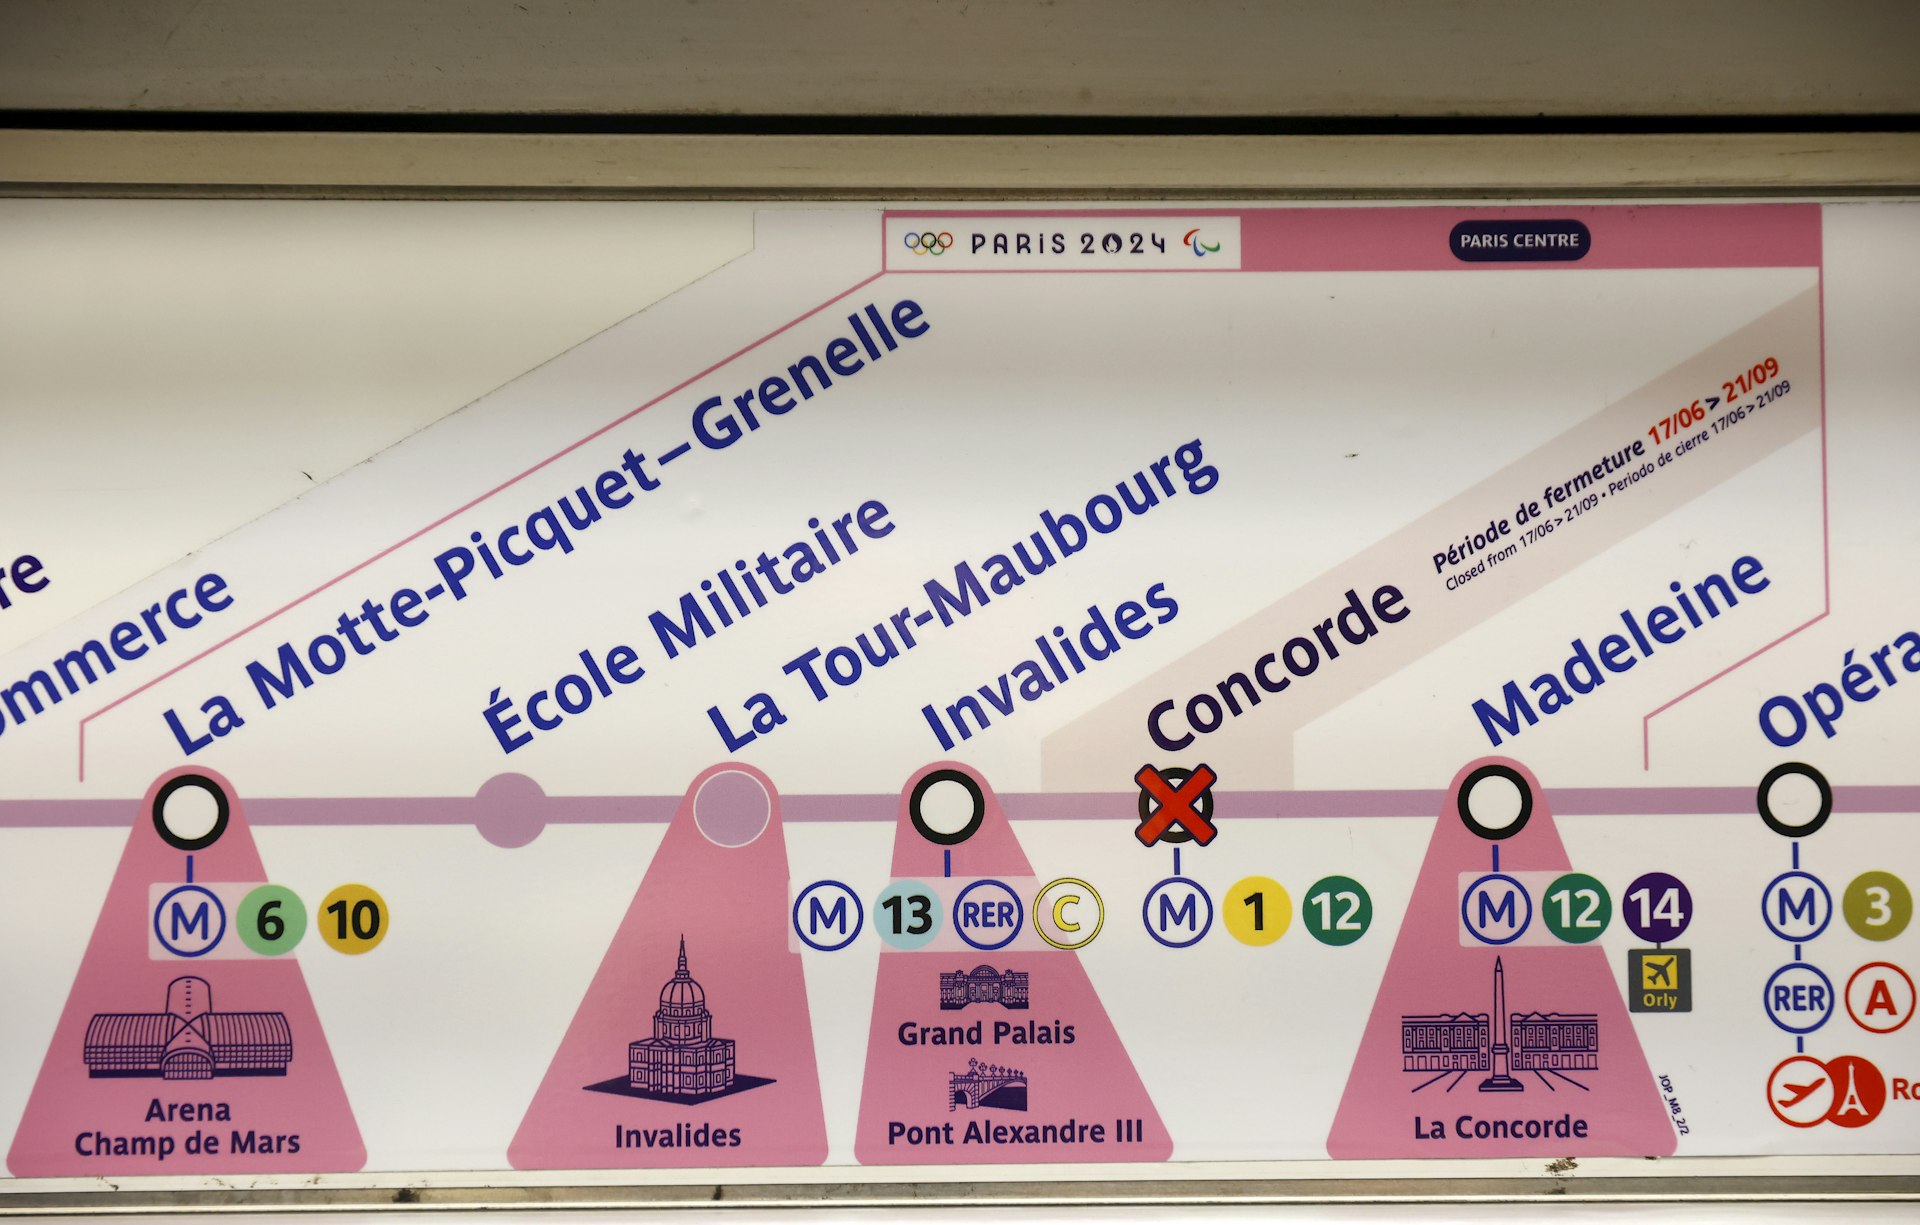 A panel showing the sites where the Paris 2024 Olympic Games events will be held is displayed in the Paris metro